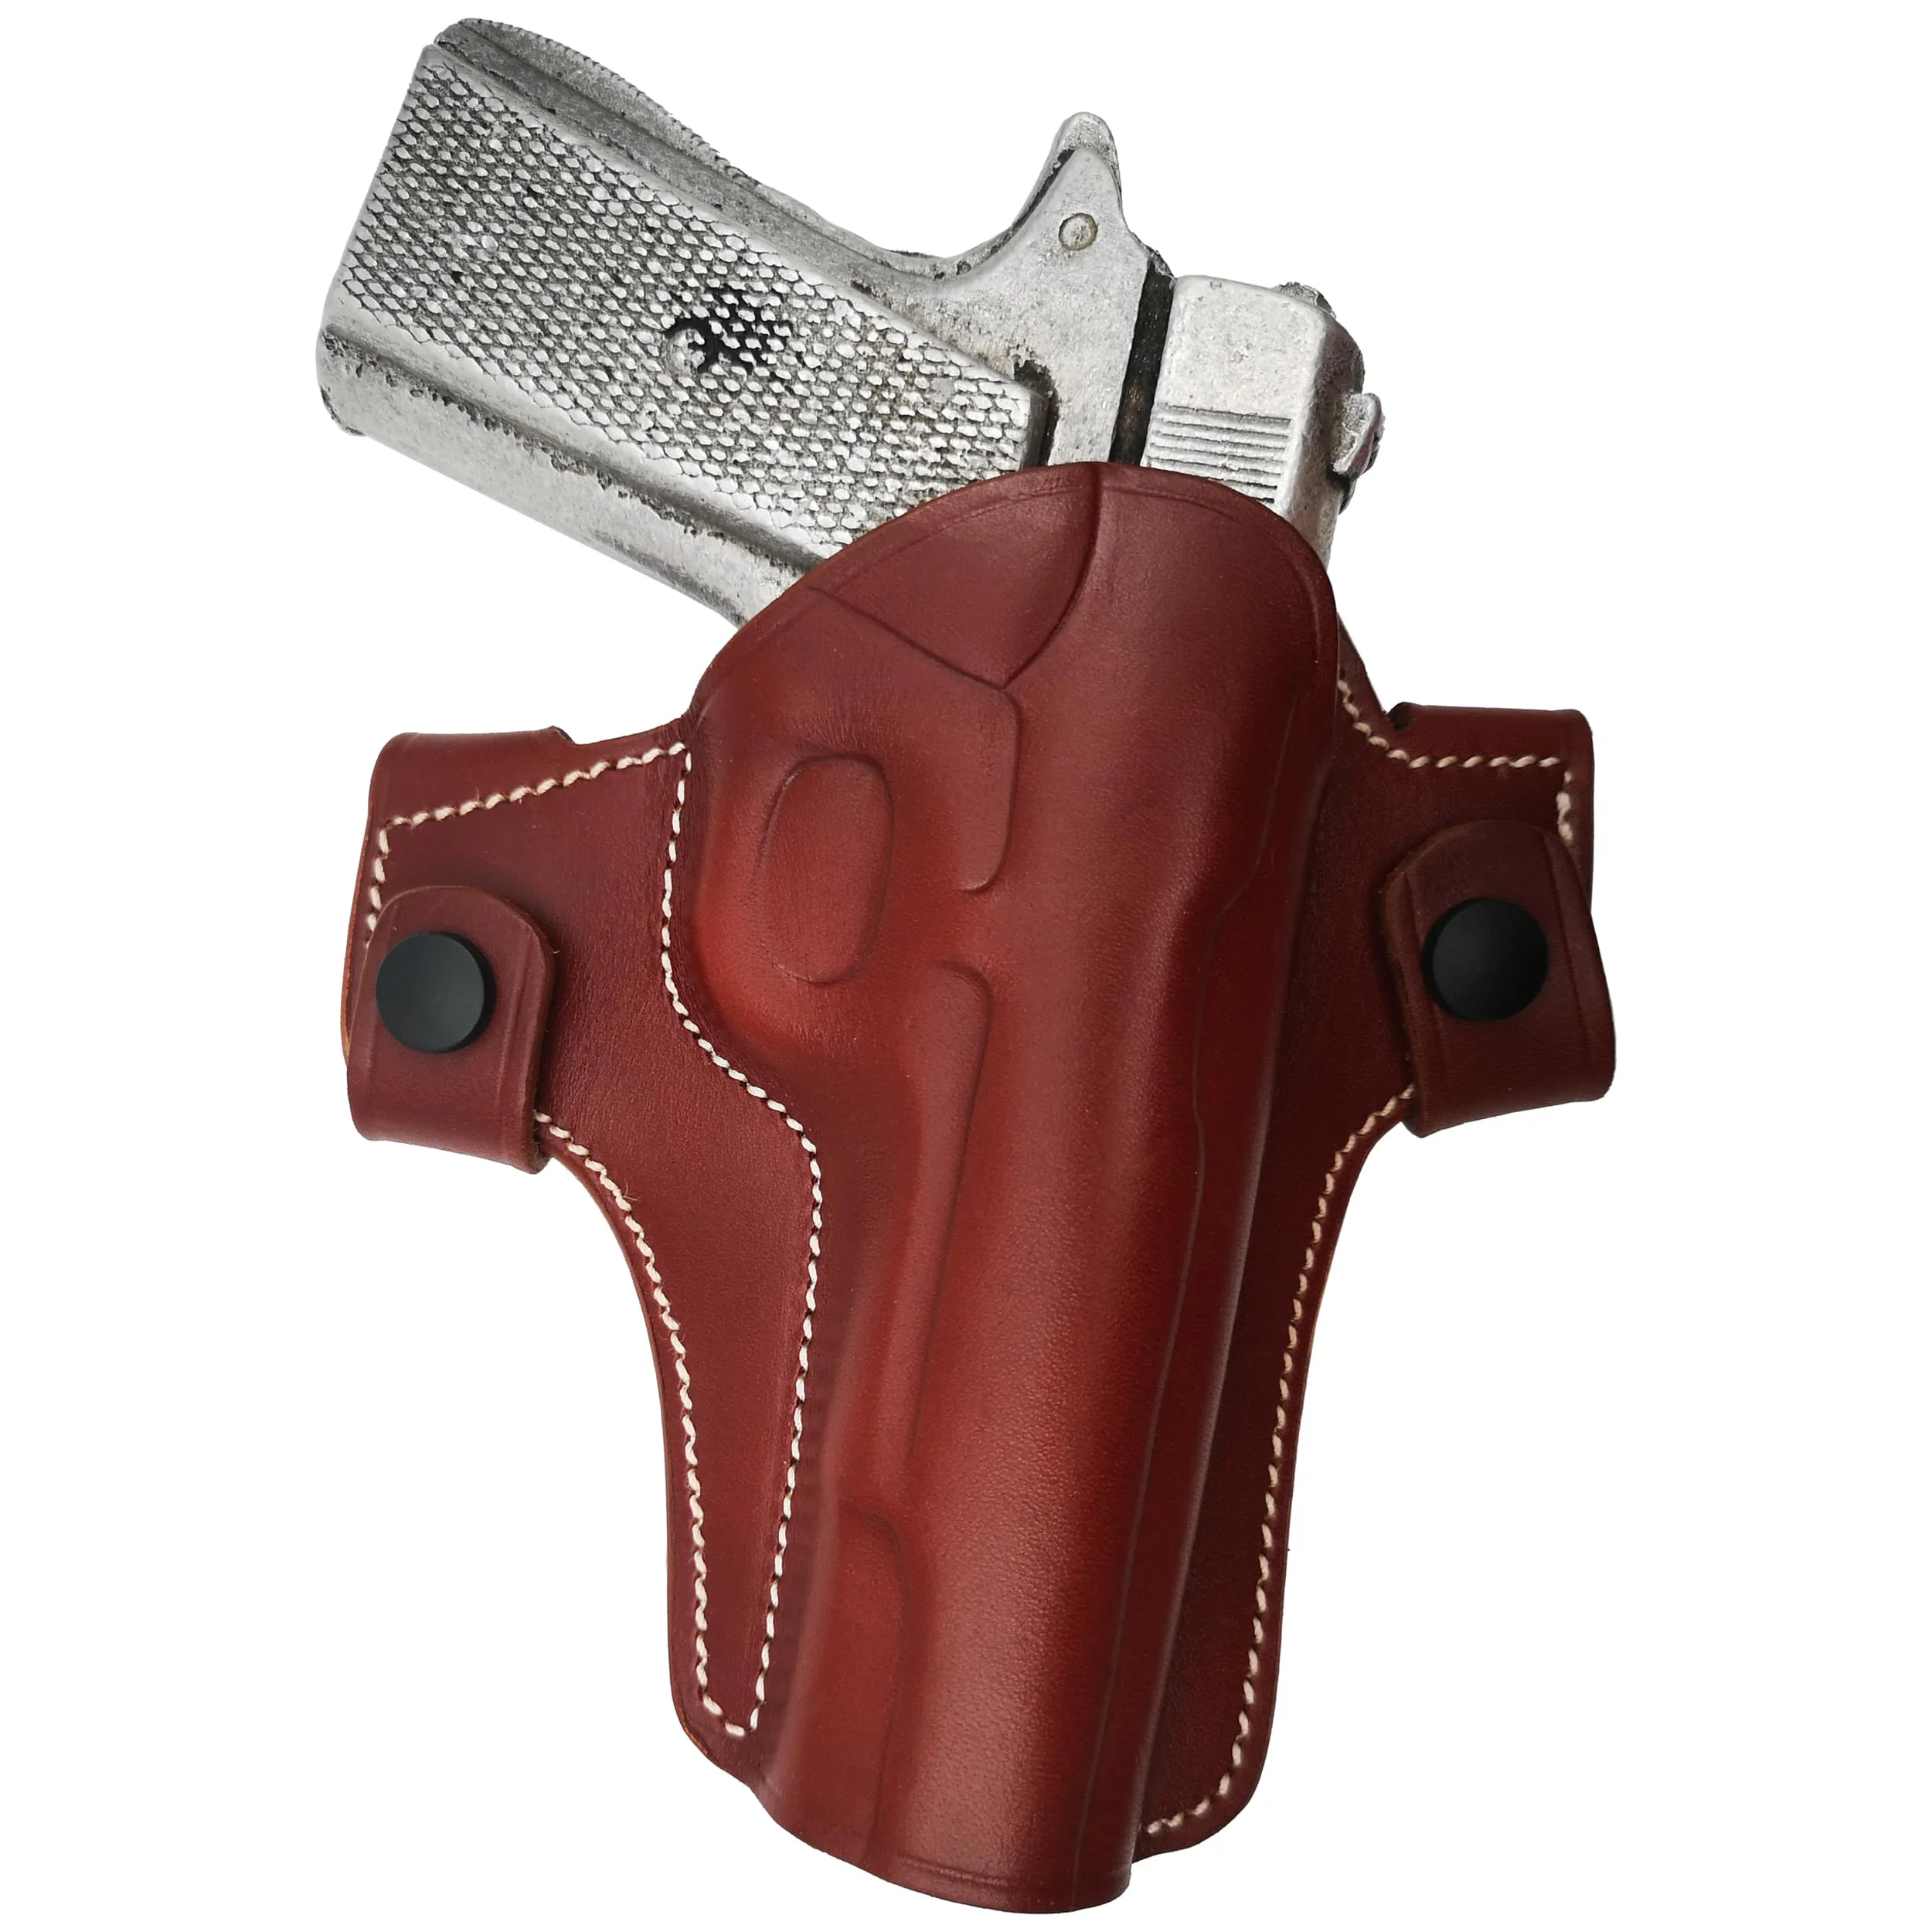 

Sig Sauer P228 Compatible Real Leather Holster Two Plug-in Belt Slot Pancake Style Quick Release OWB Gun Pouch Brown